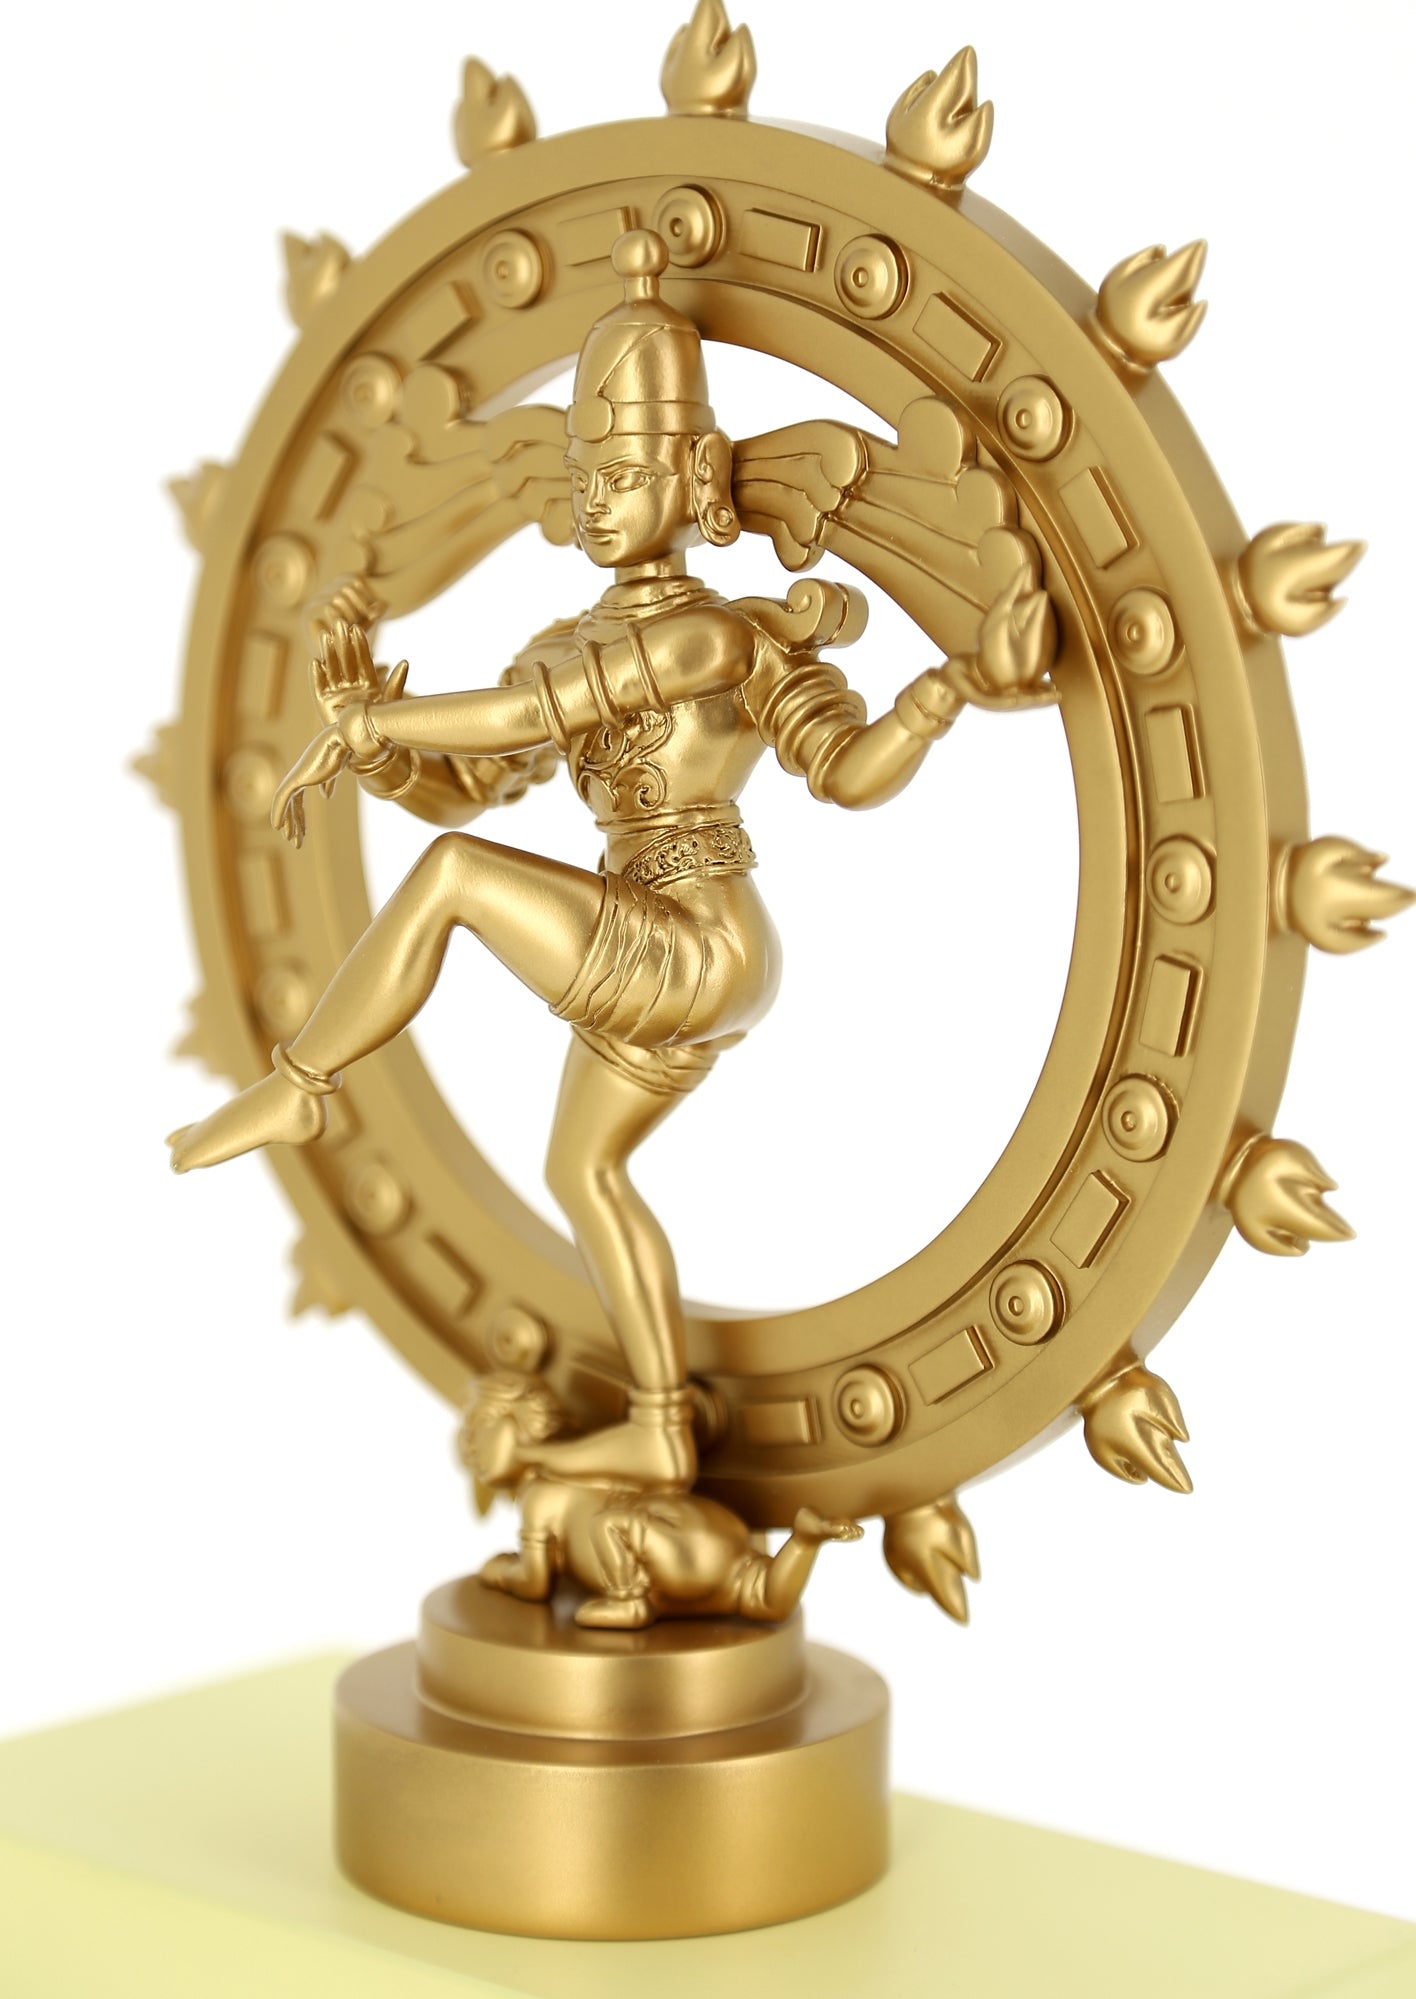 RESIN COLLECTIBLE: Imaginary Museum - Shiva